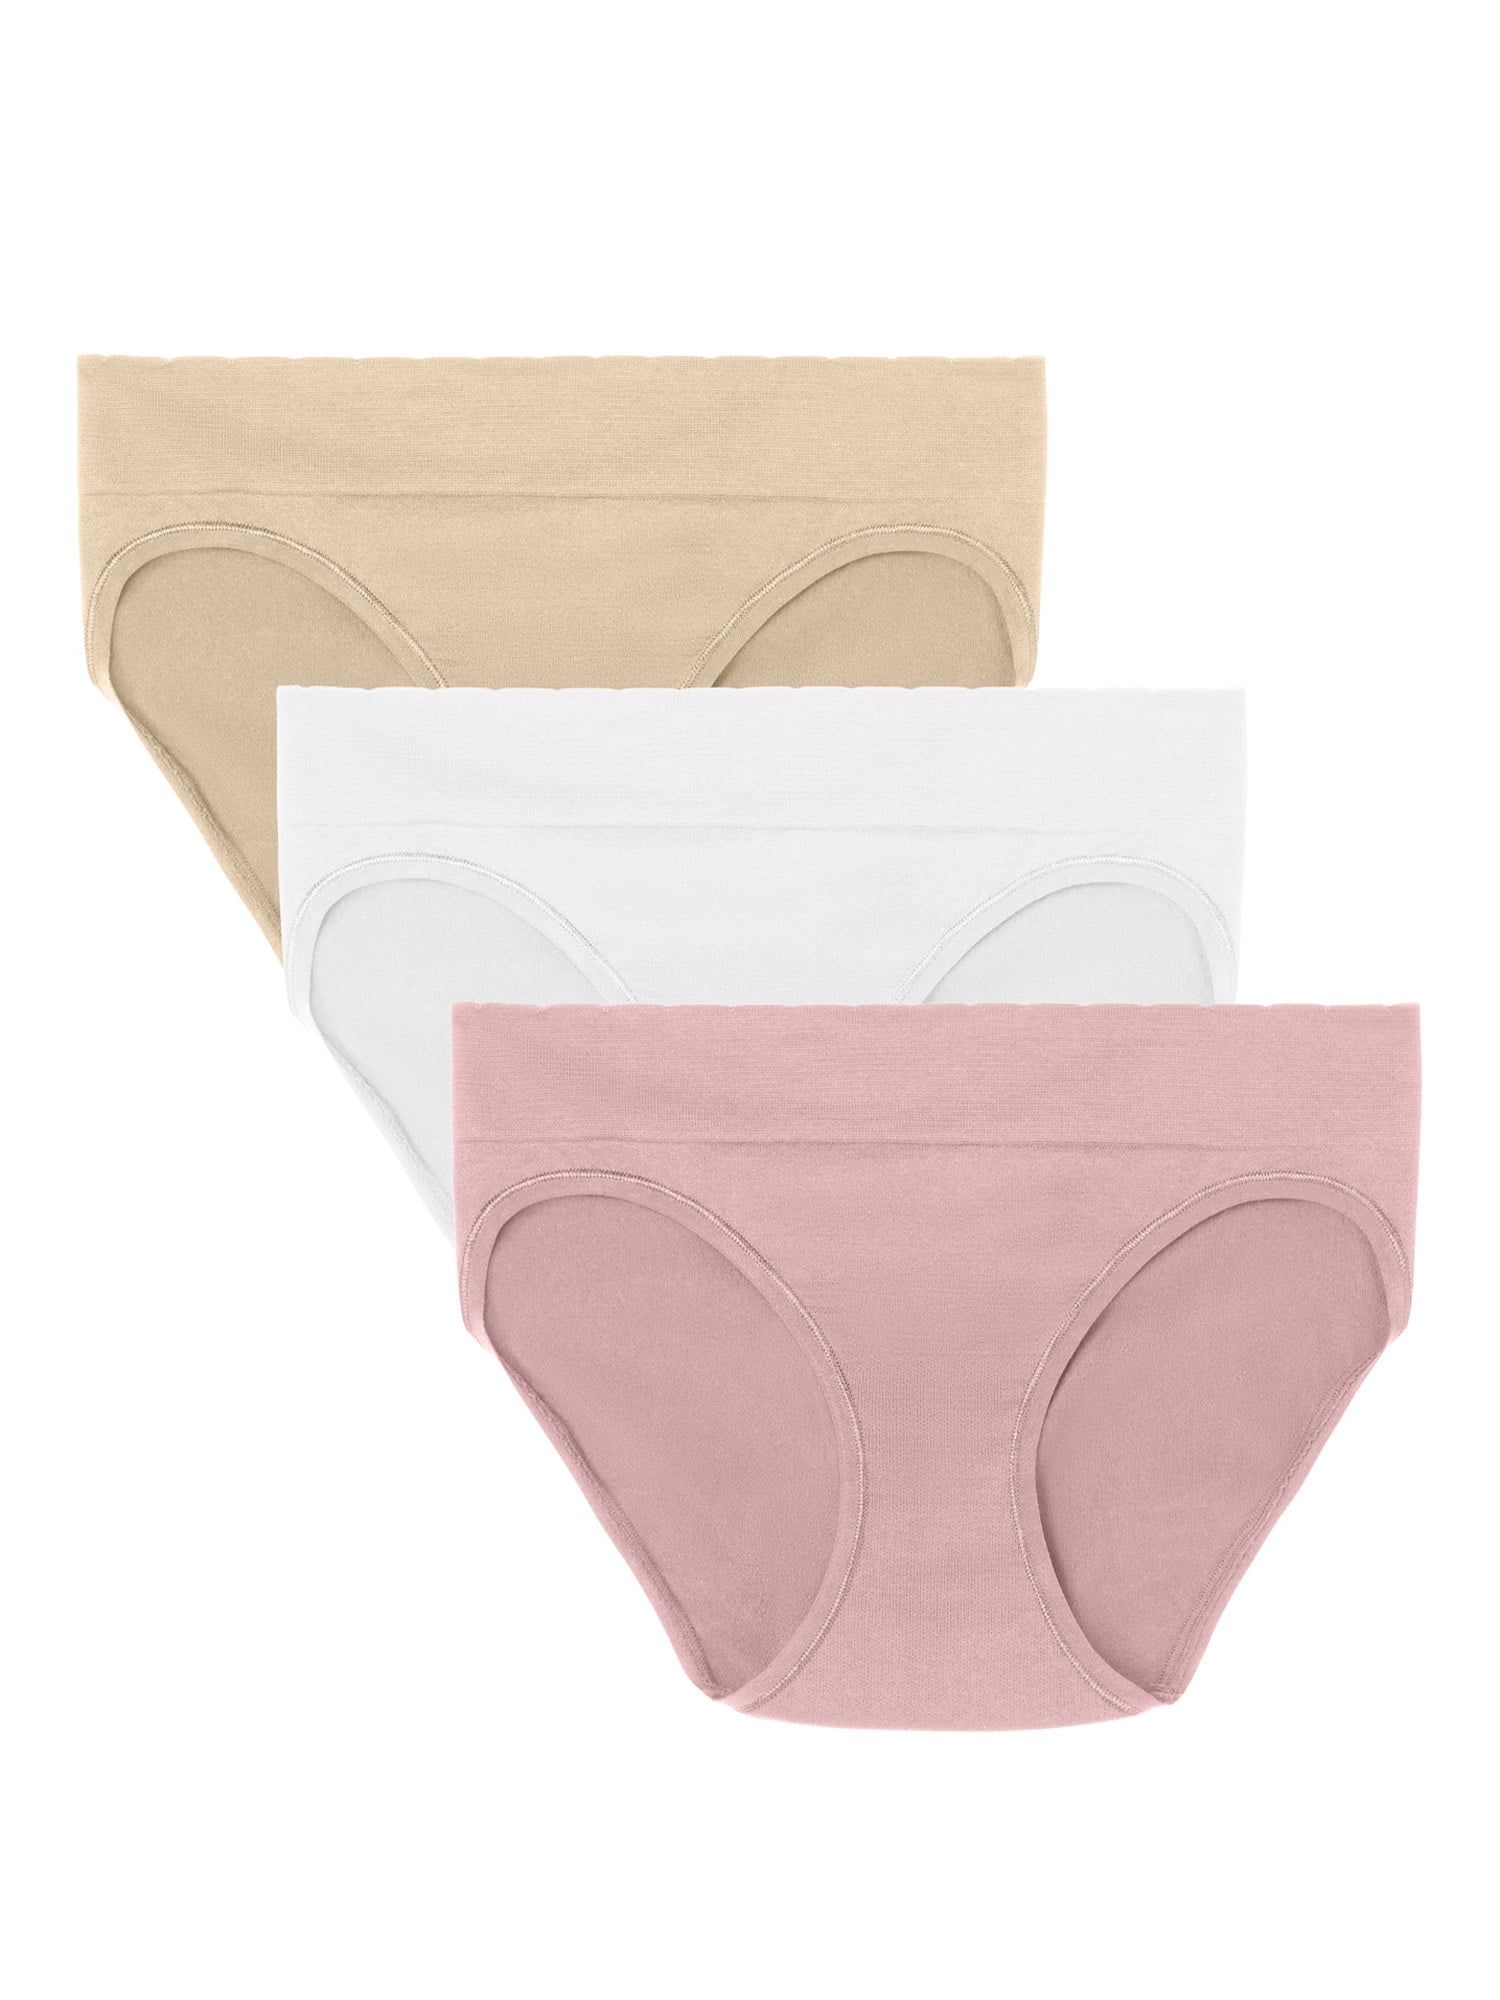 FallSweet No Show Underwear for Women Seamless High Cut Briefs Mid-waist  Soft No Panty Lines,Pack of 5 